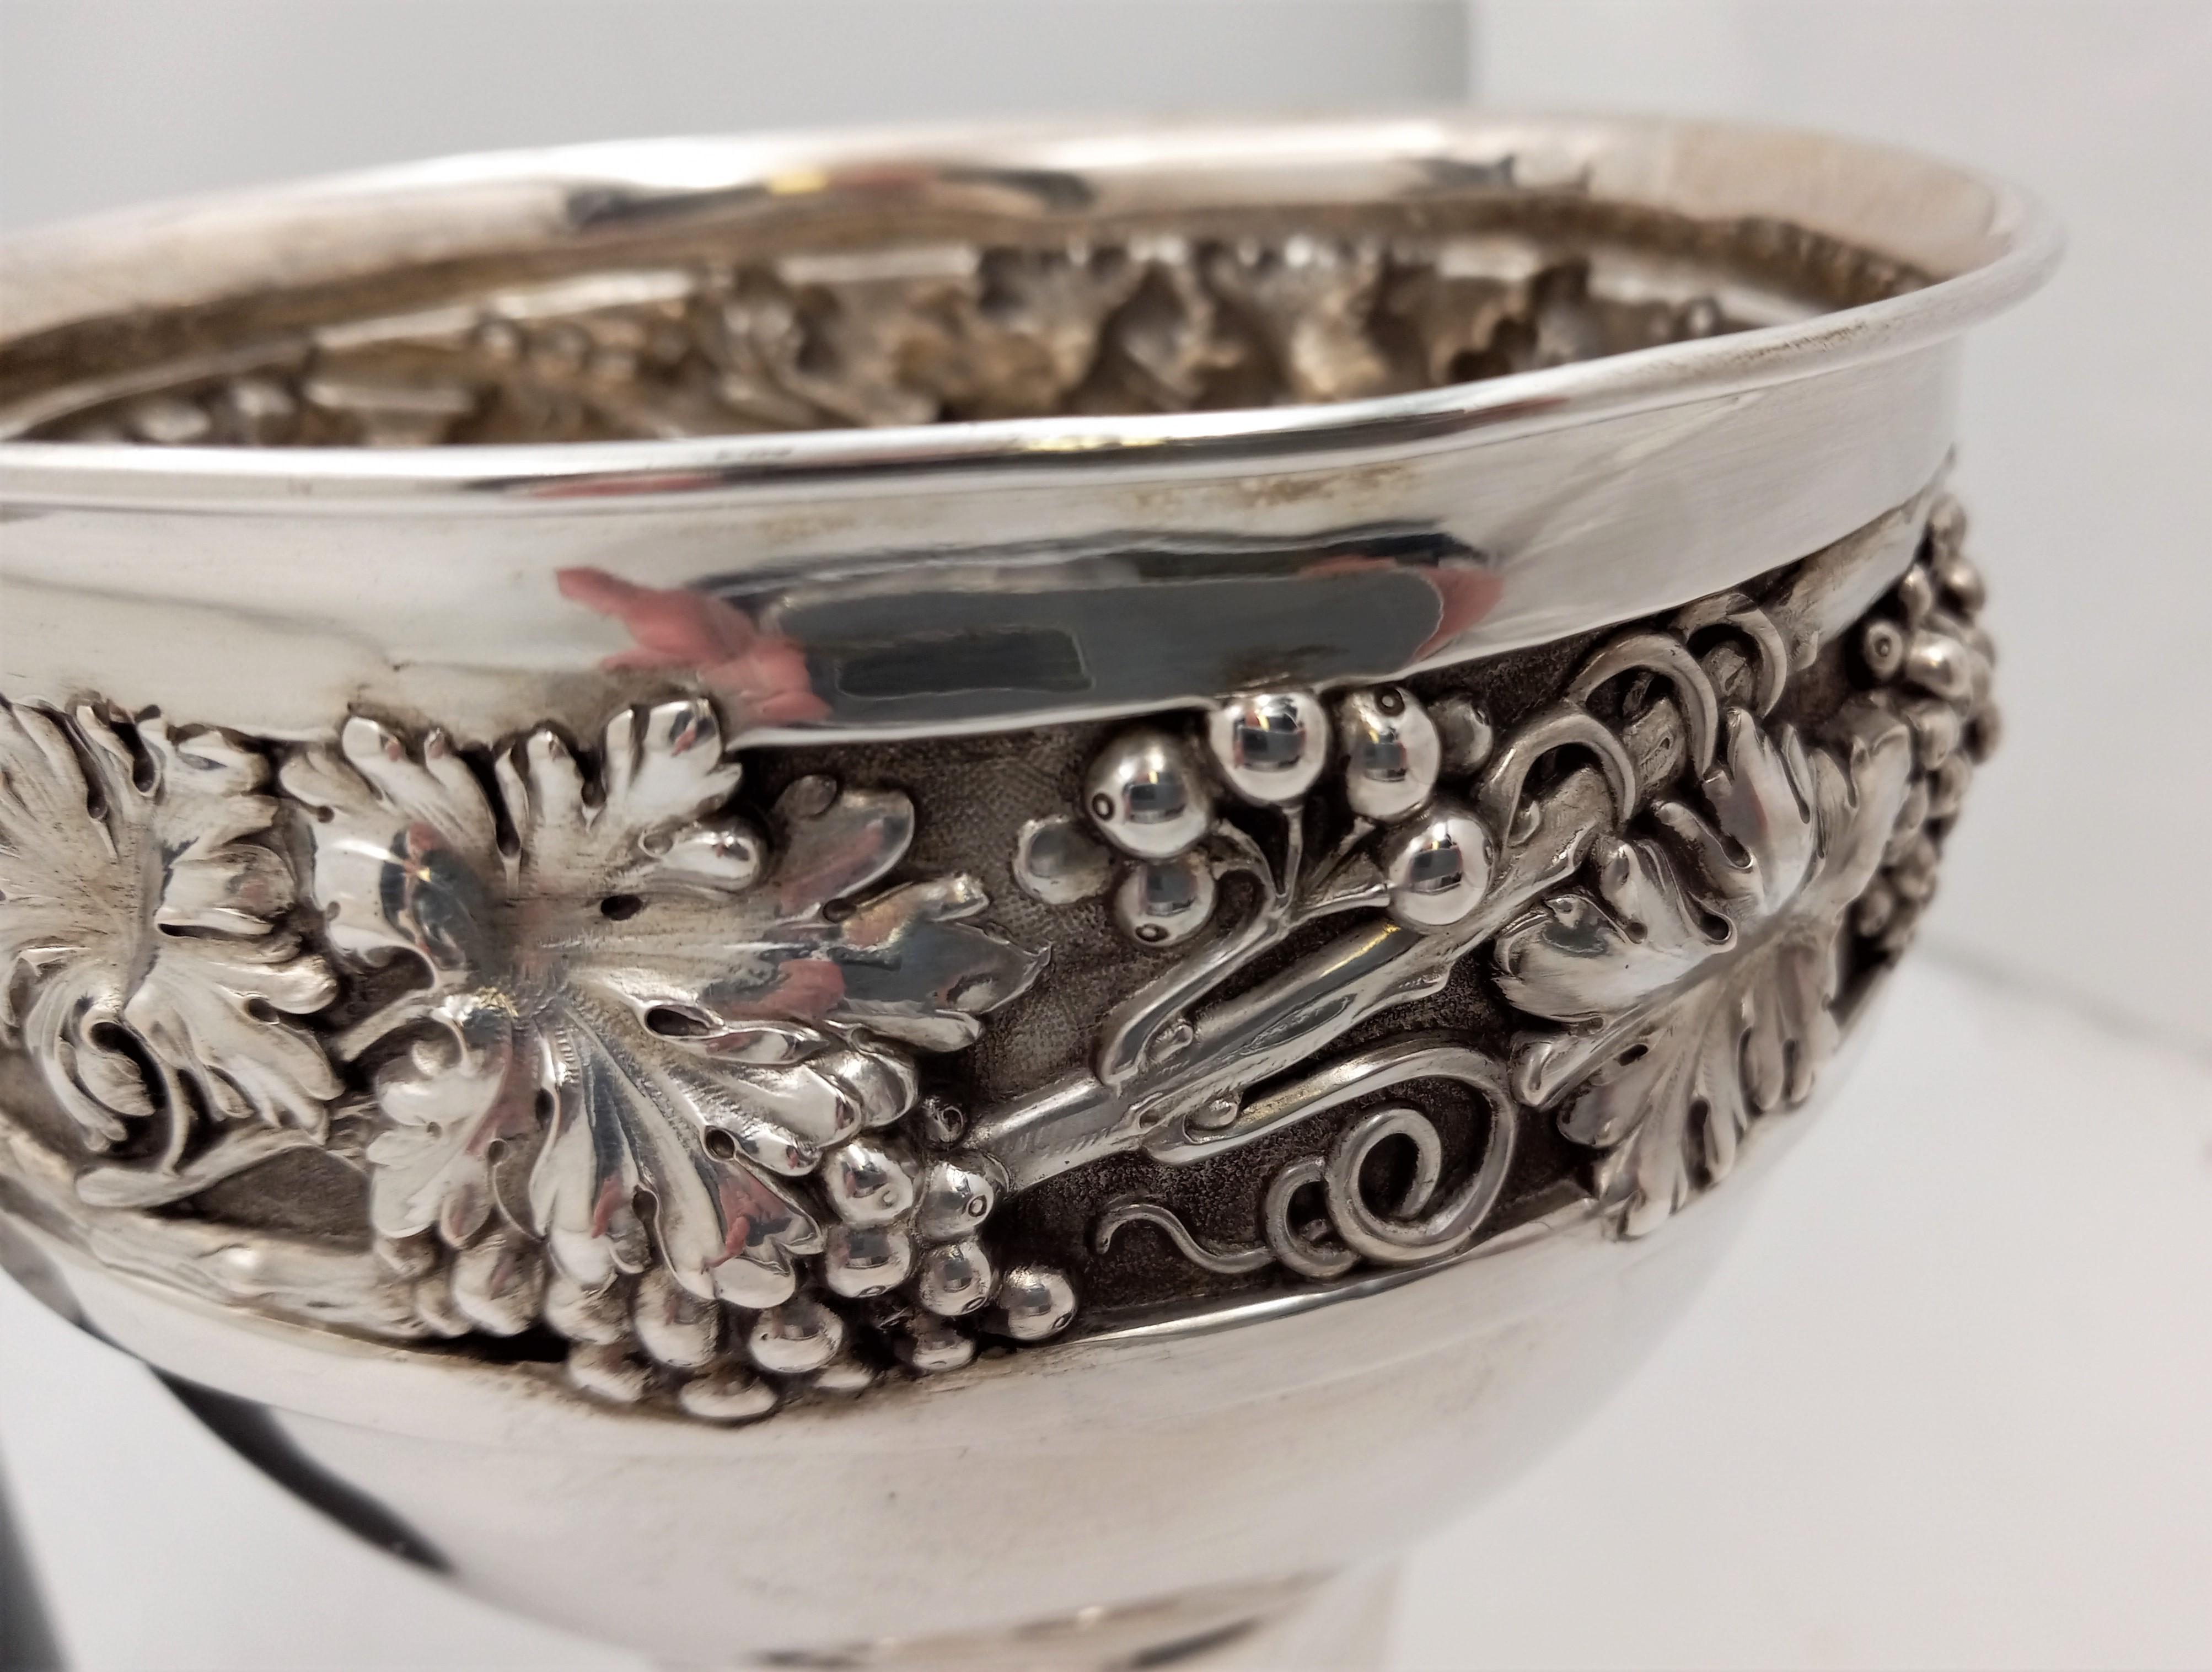 Deyhle German, late 19th or early 20th century 0.800 continental silver monumental wine goblet with an artistically twisted, fluted stem, and highly realistic grape and vine motifs as a frieze. It measures 7 1/2'' in height by 5 1/2'' in diameter at